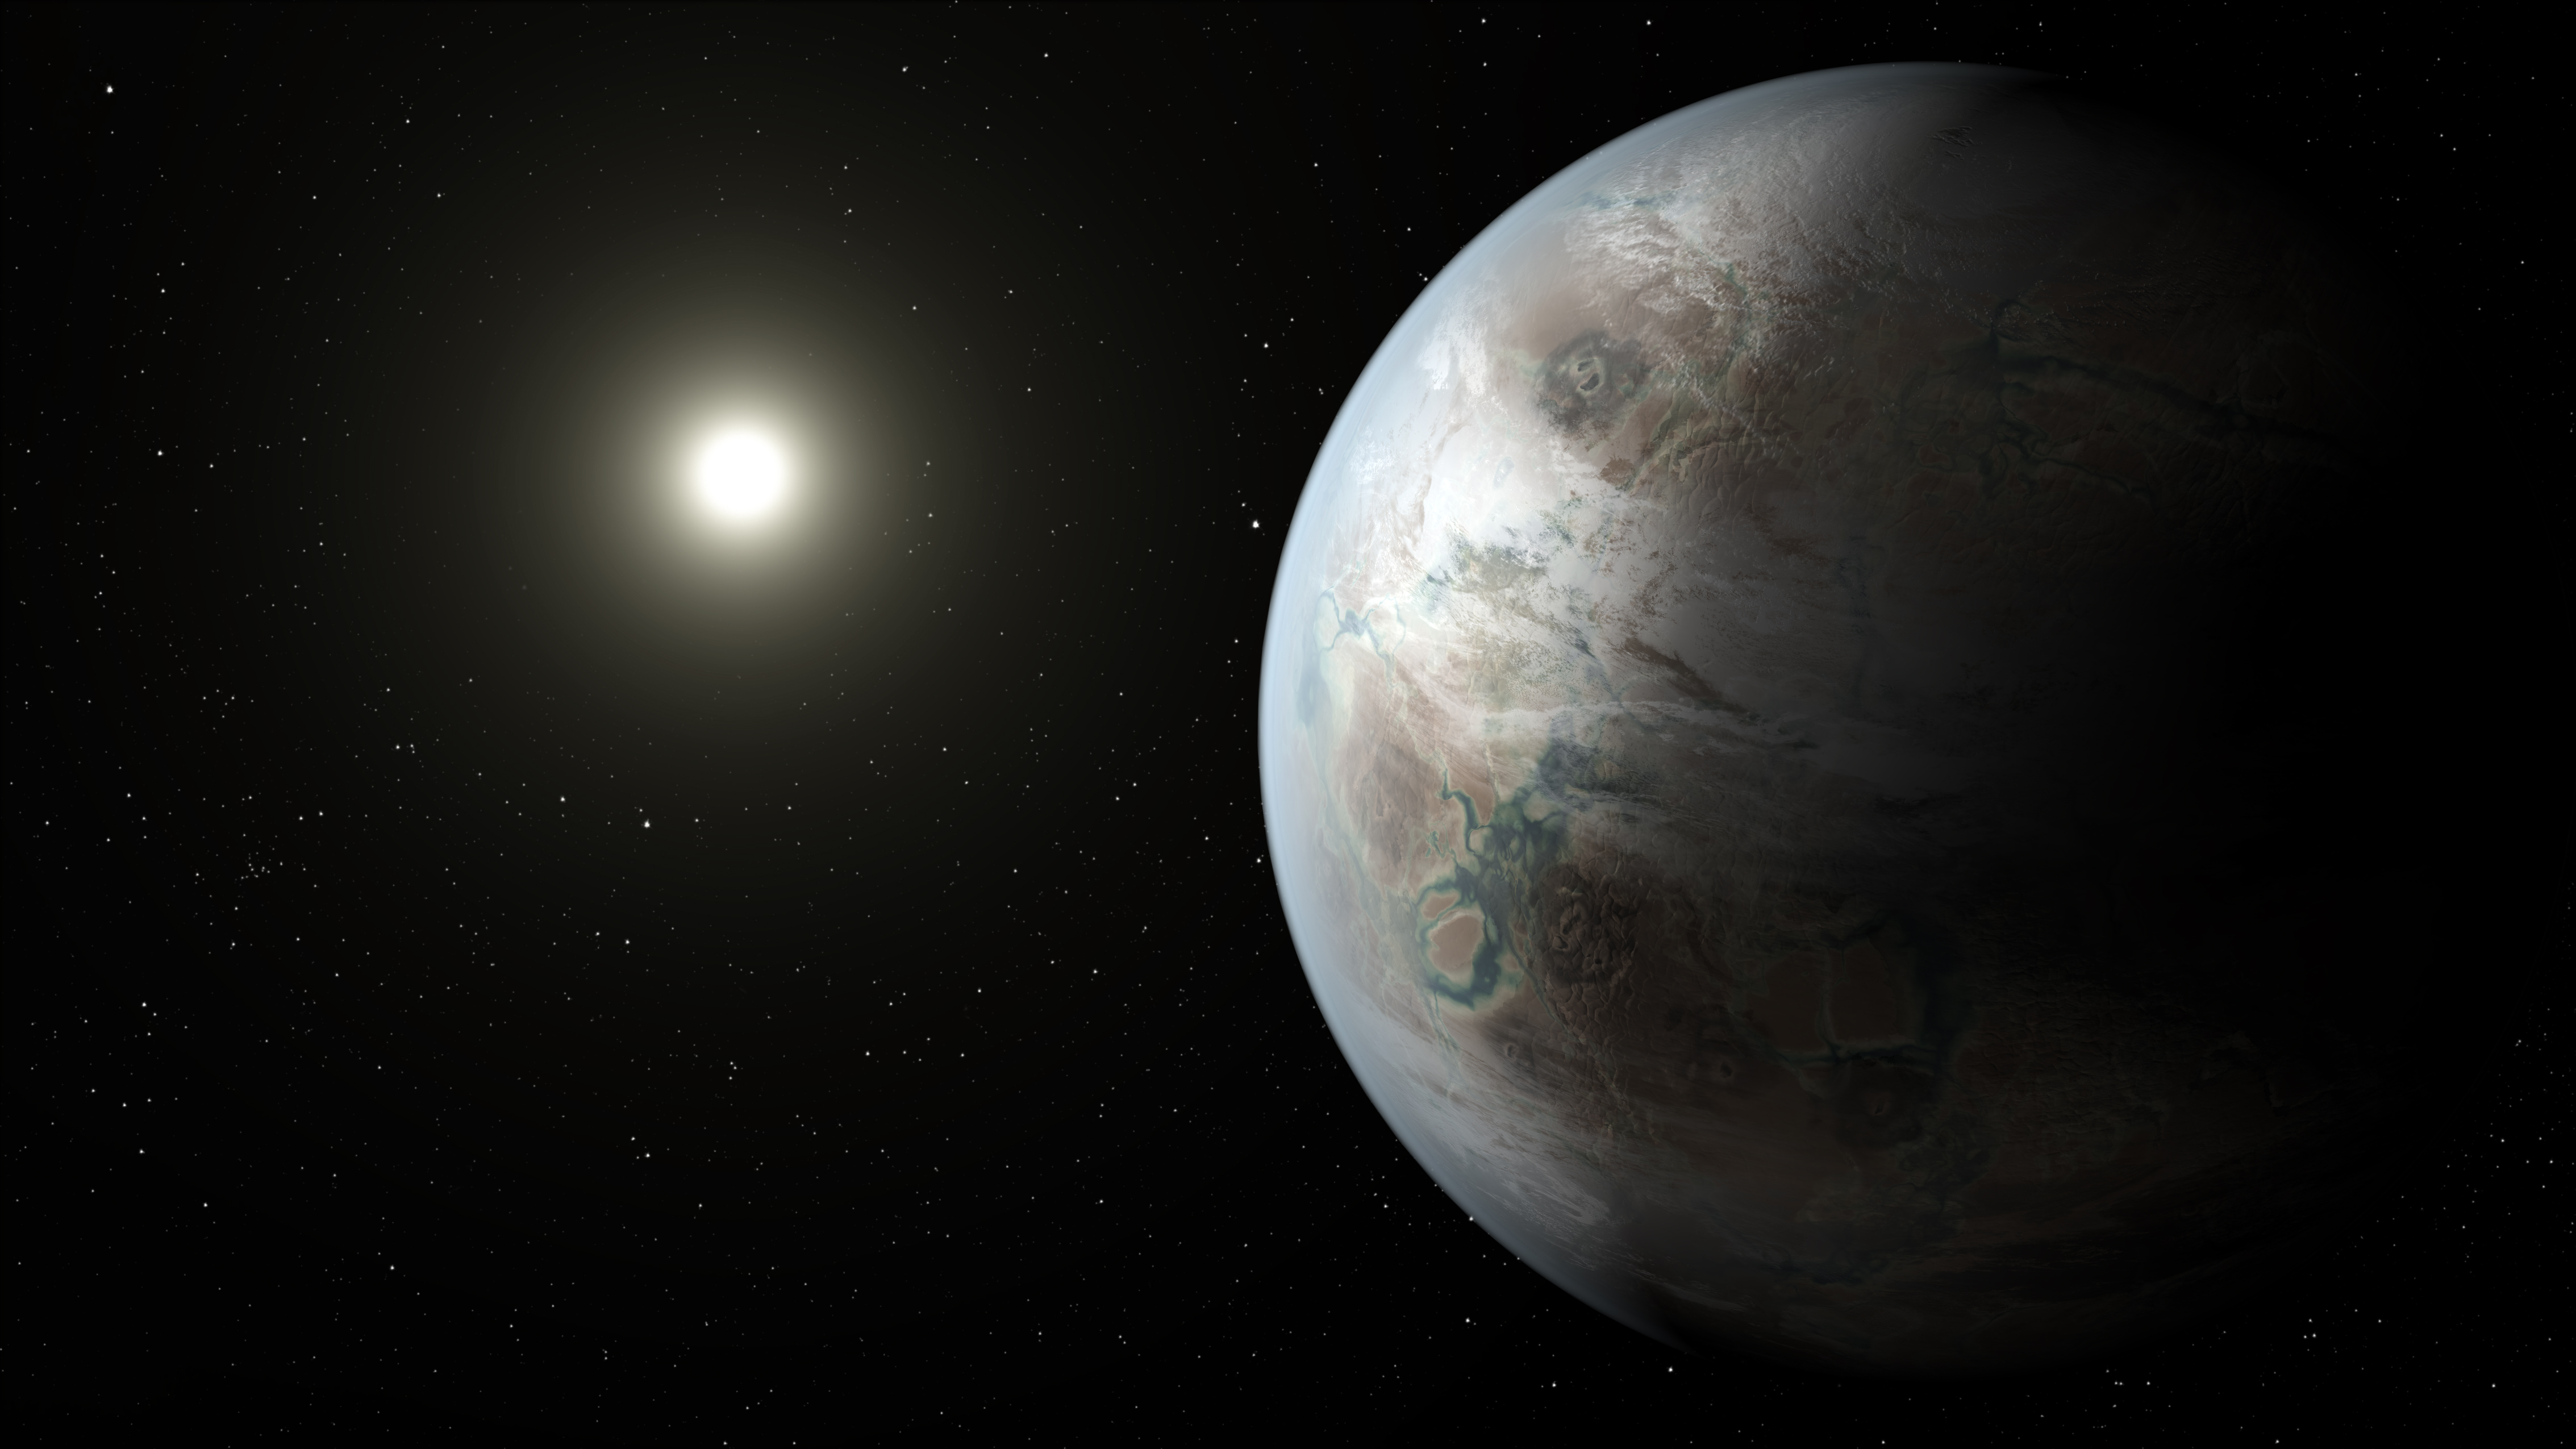 This artist's concept depicts one possible appearance of the planet Kepler-452b, the first near-Earth-size world to be found in the habitable zone of star that is similar to our sun. Kepler-452b orbits its star every 385 days. The planet's star is about 1,400 light-years away in the constellation Cygnus. It is a G2-type star like our sun, with nearly the same temperature and mass. This star is 6 billion years old, 1.5 billion years older than our sun. Credit: NASA Ames/JPL-Caltech/T. Pyle